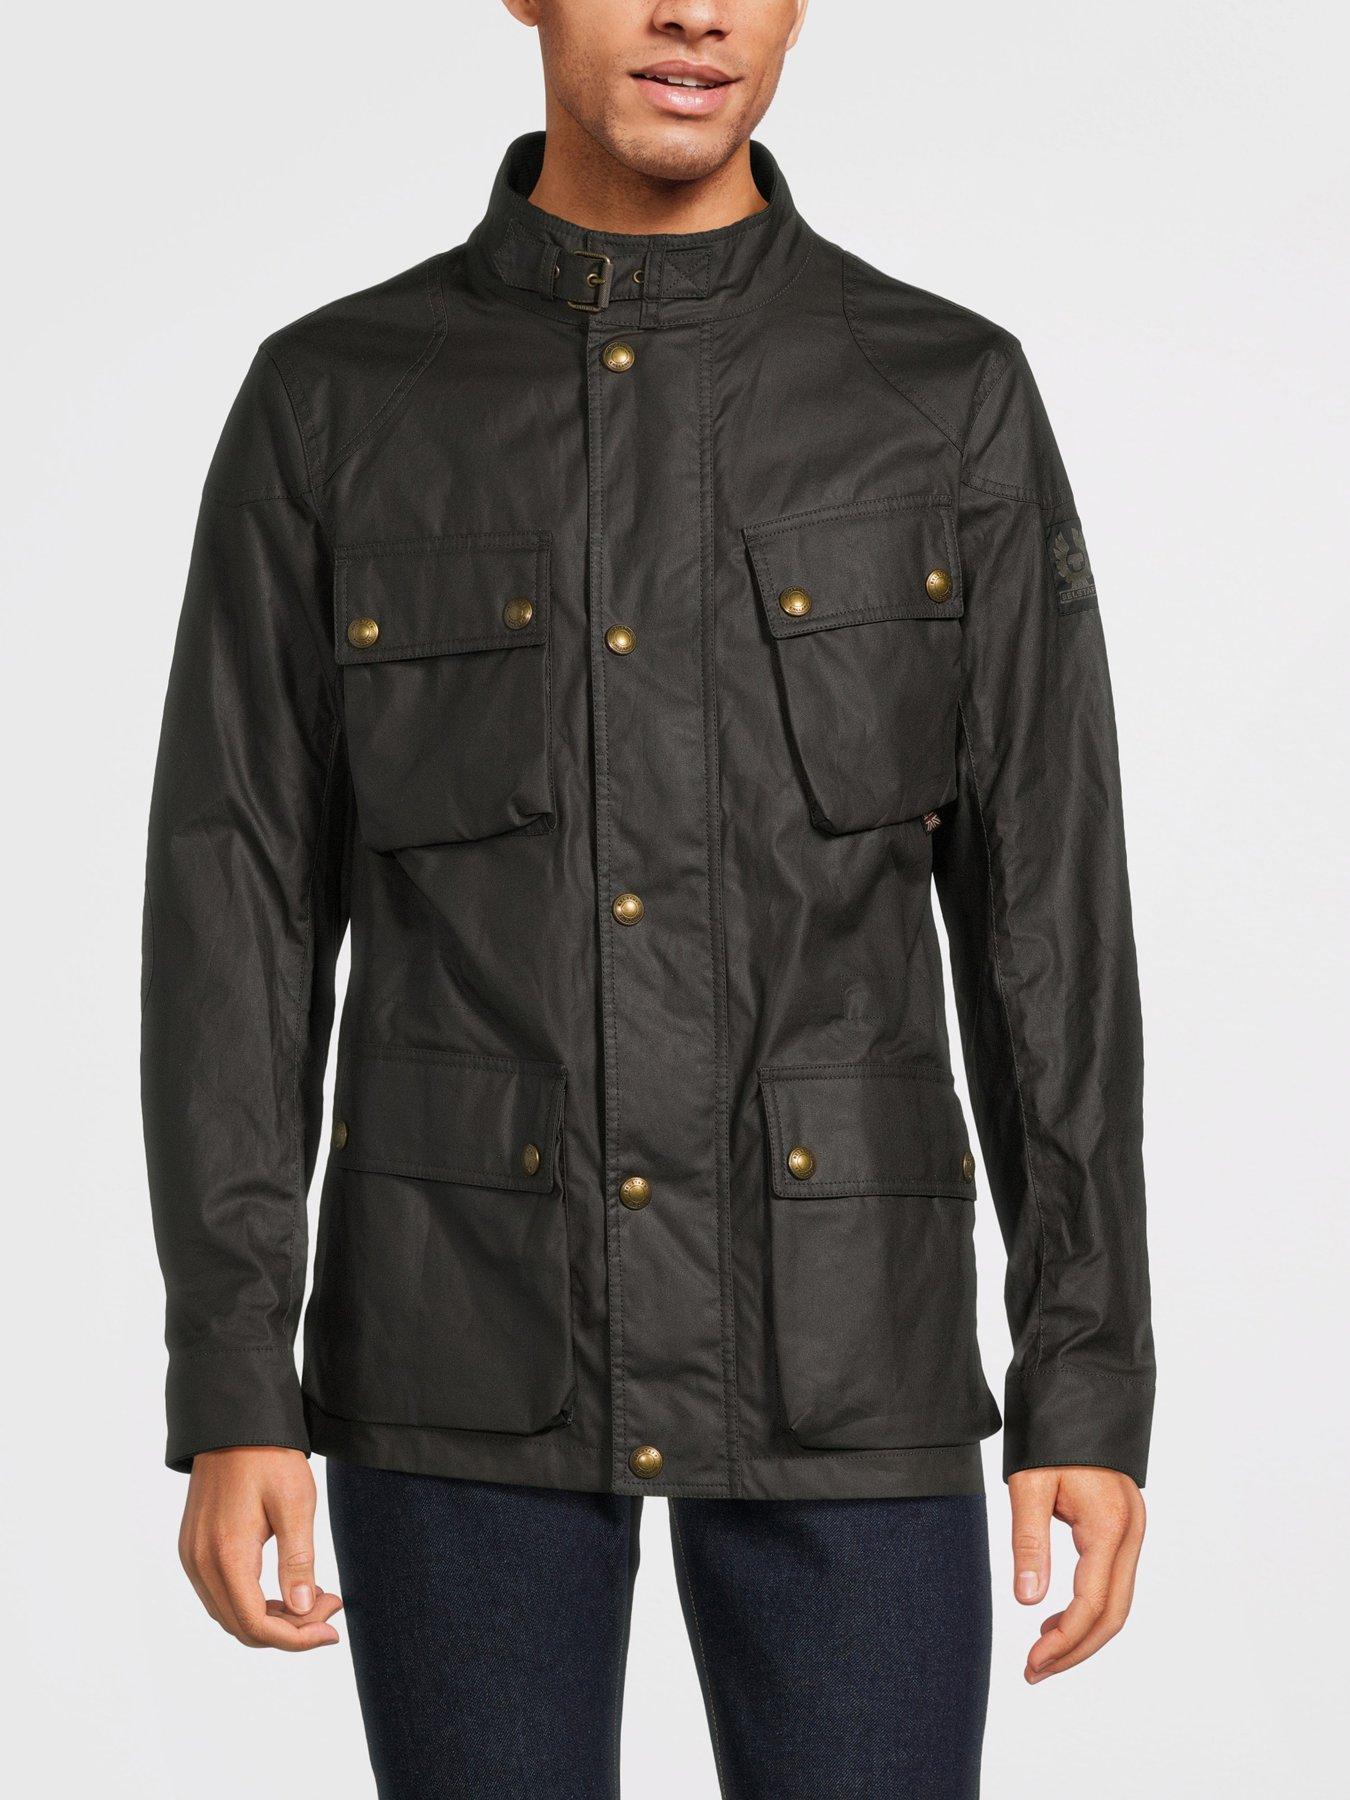 belstaff 2010s jacket available on A.N.G.E.L.O. Vintage